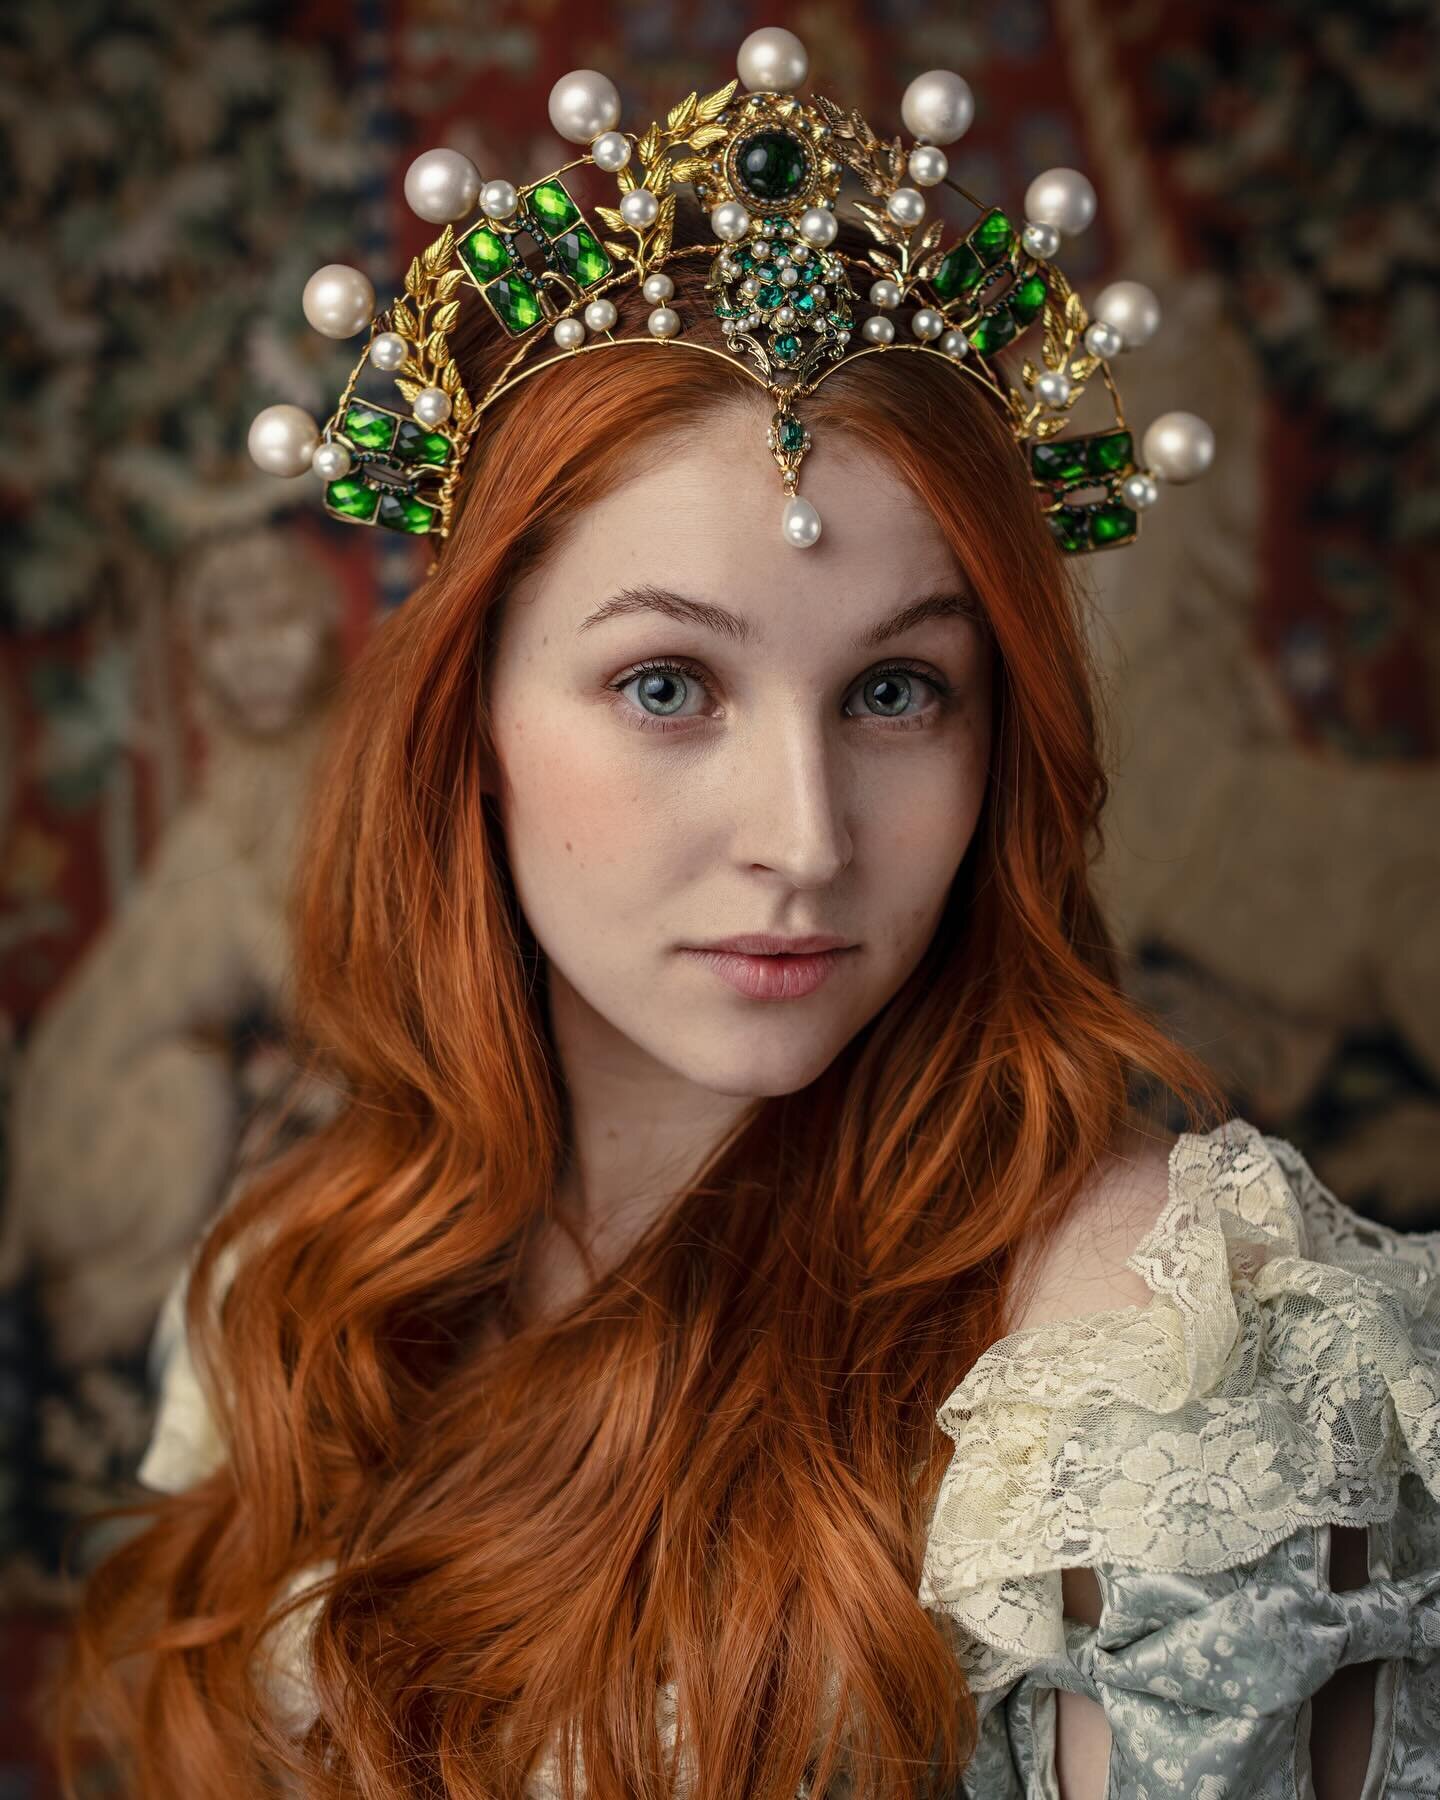 Had the absolute pleasure of working with the beautiful actress @annierosetate this morning creating some &lsquo;Damsel&rsquo; inspired portraits.  The stunning headdress is by the incredibly talented @mrmortimerswife who I just love working with too